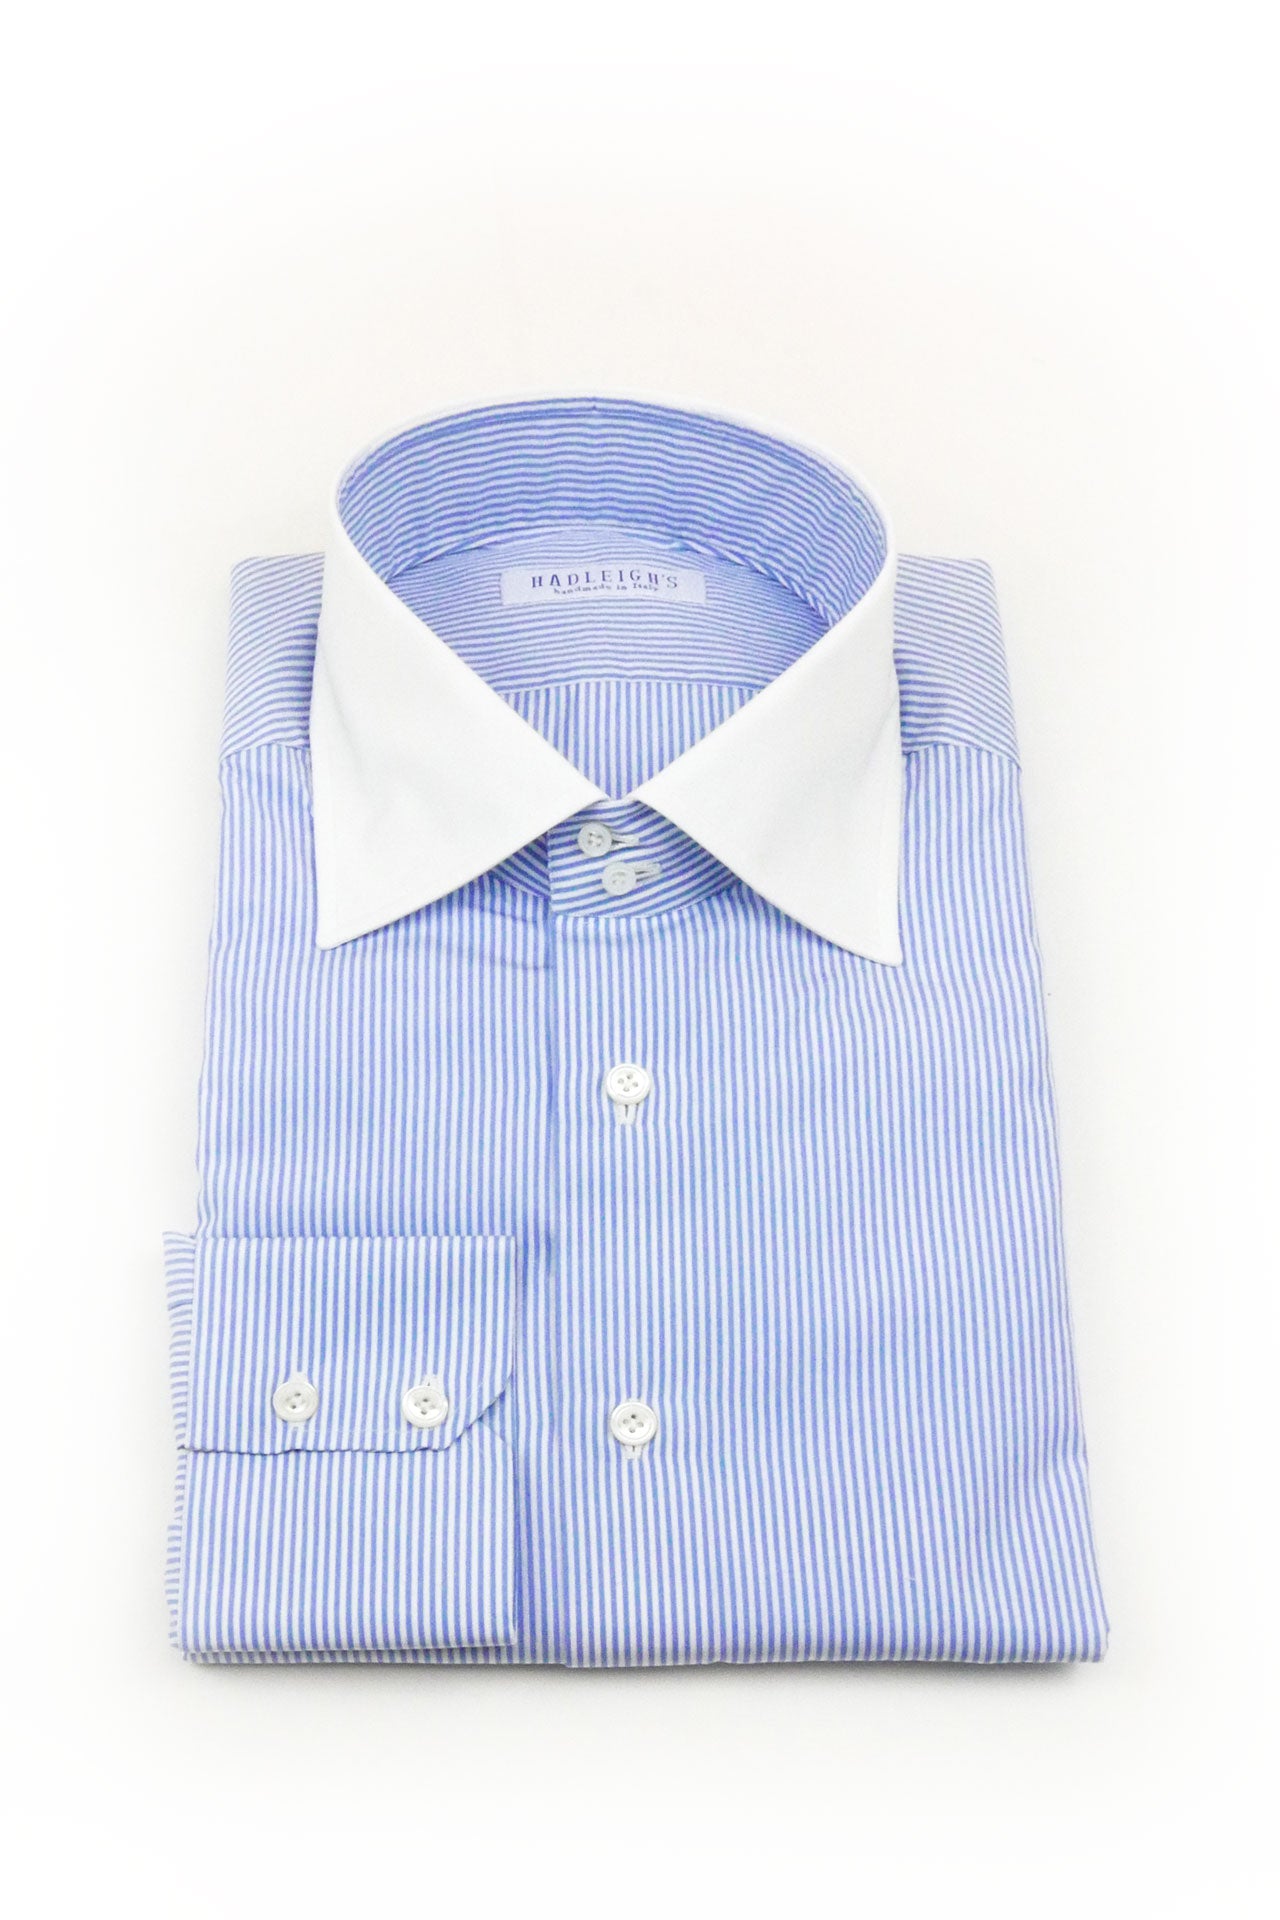 James Double Button Collar in Blue Stripe with Contrast Collar